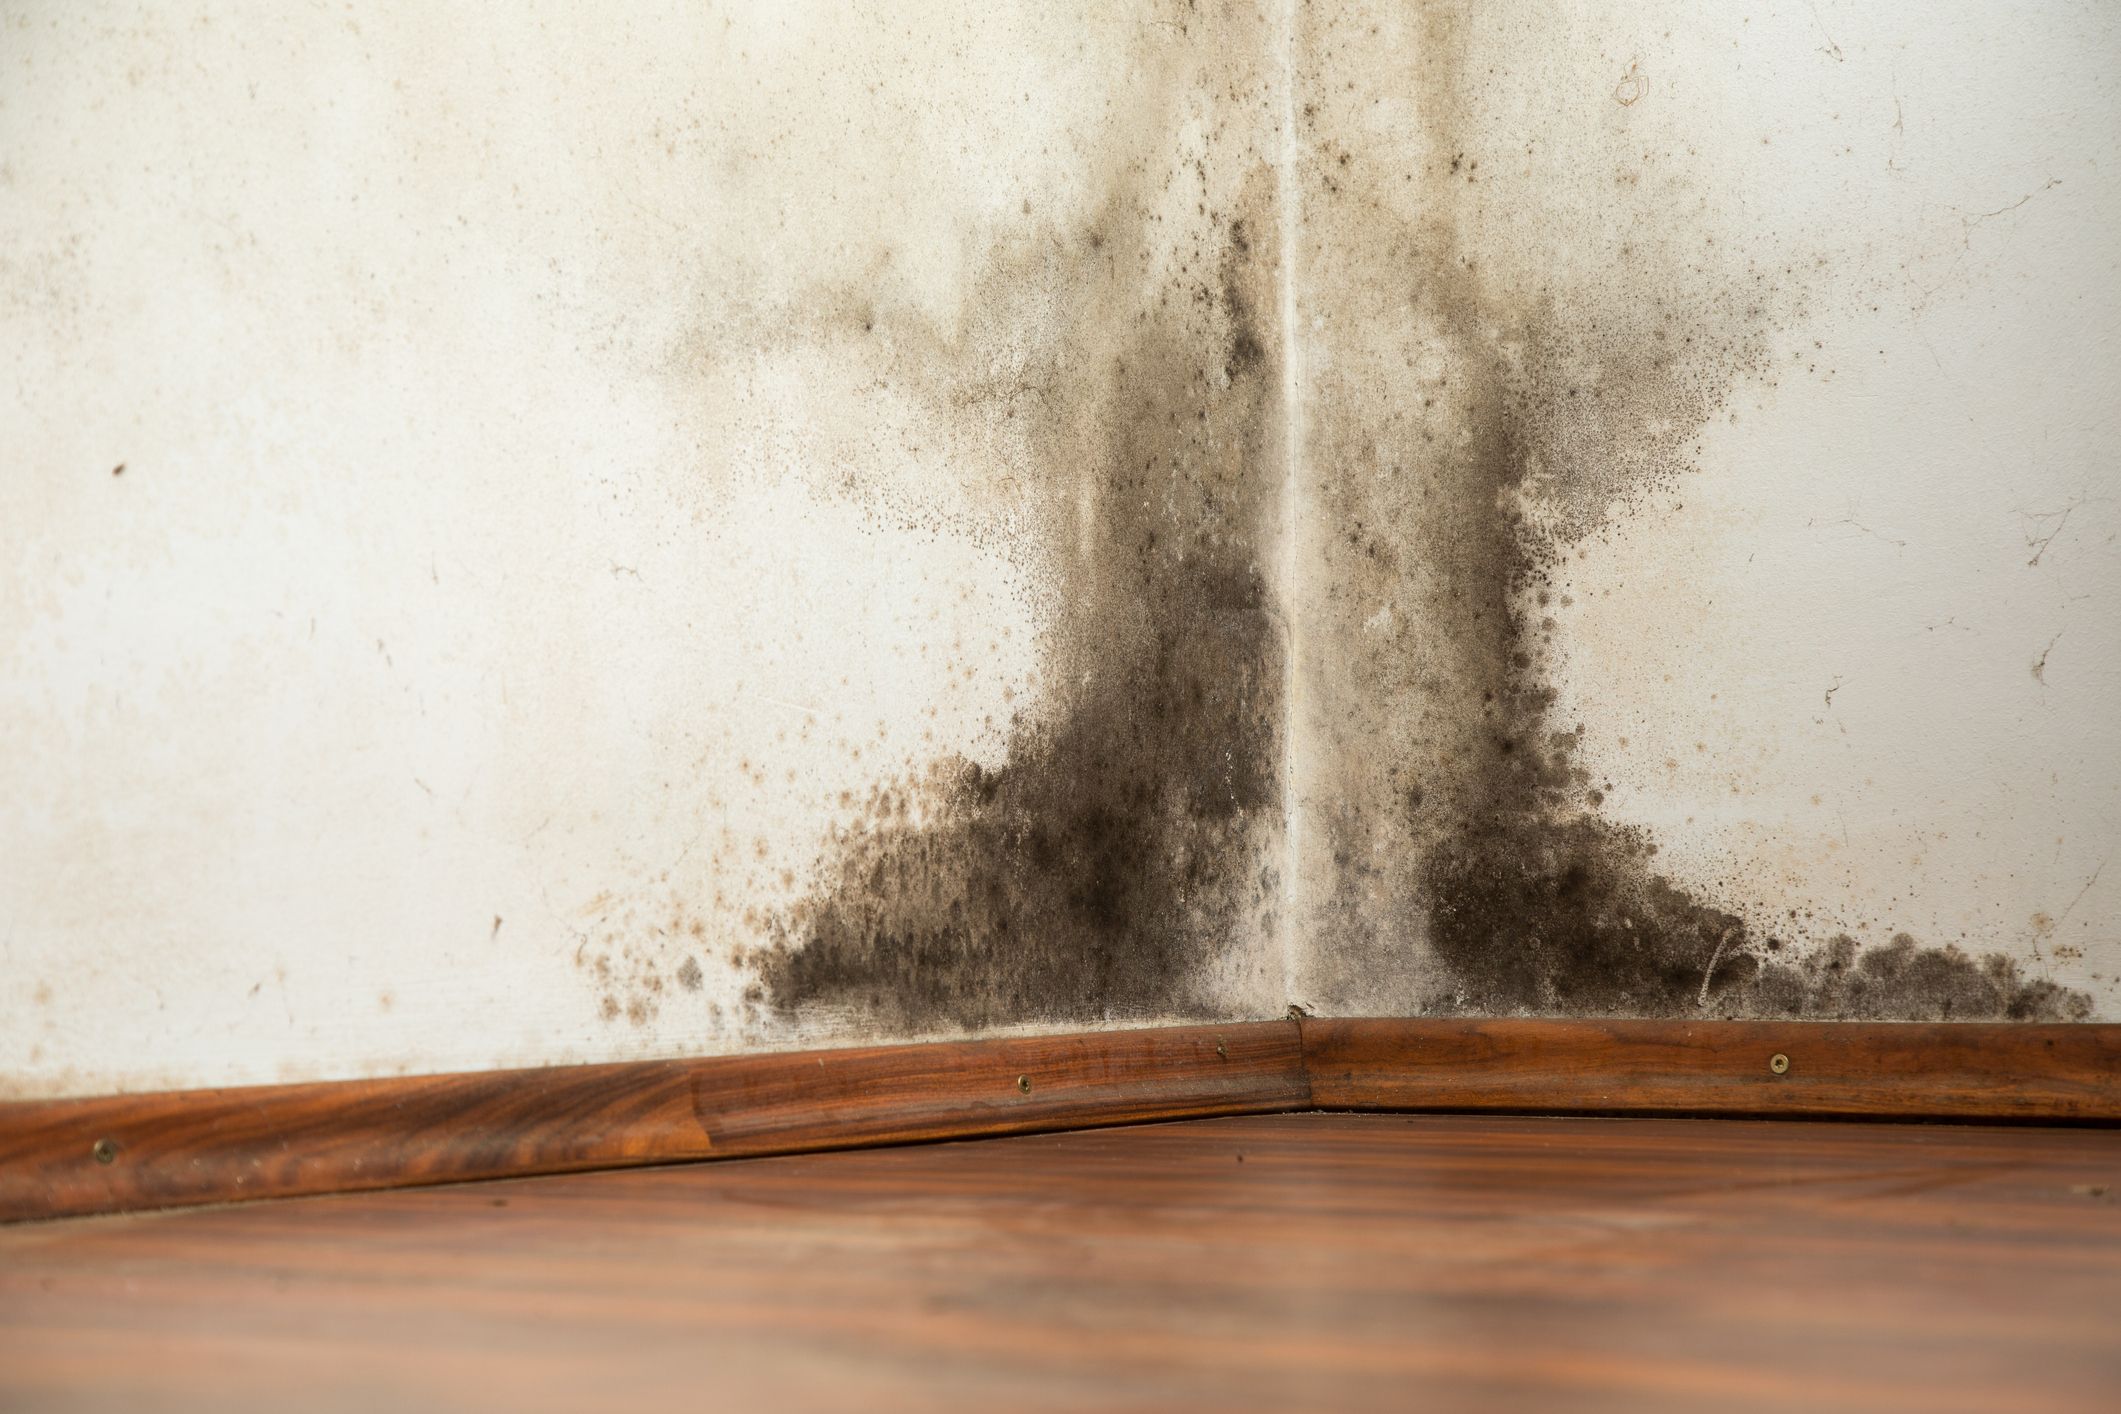 How do I safely remove the black mold from my shower walls? : r/CleaningTips